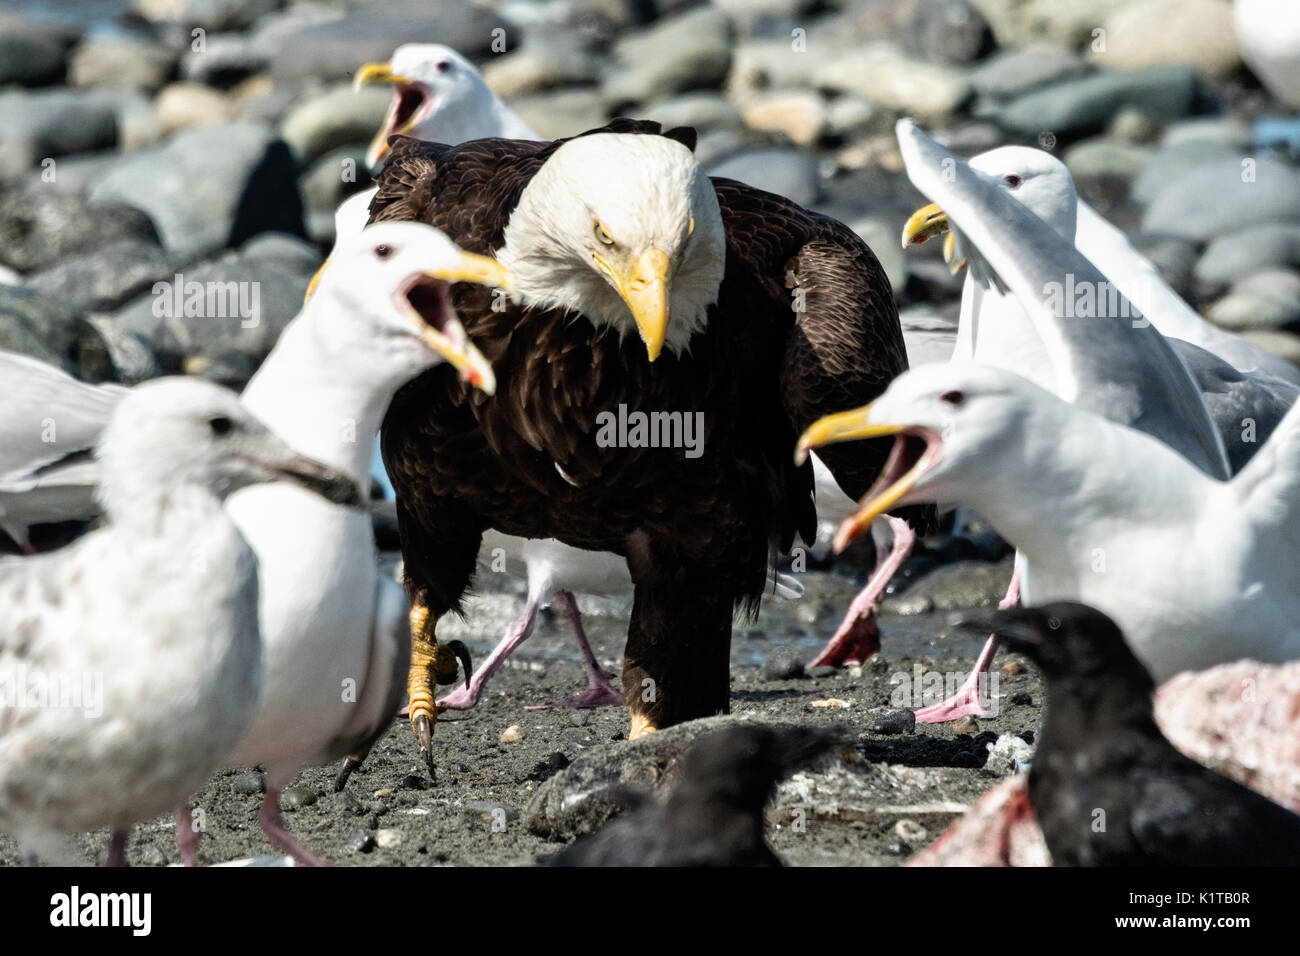 An adult bald eagle muscles past complaining seagulls on the way to grab fish scraps off the beach at Anchor Point, Alaska. Stock Photo